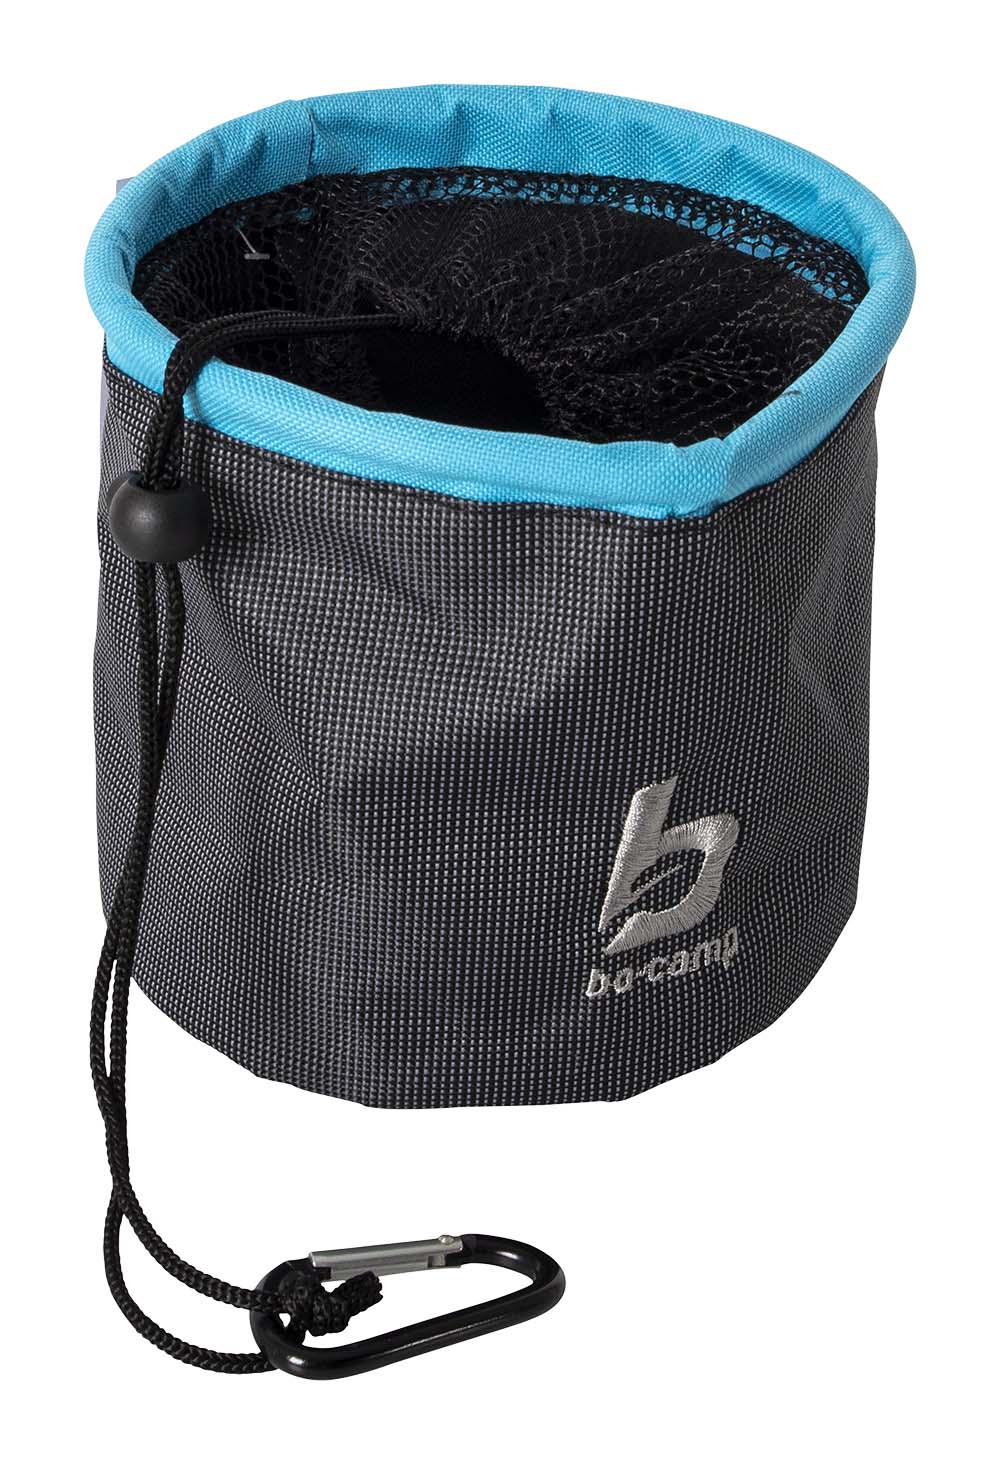 Bo-Camp - Storage bag - For clothes pegs